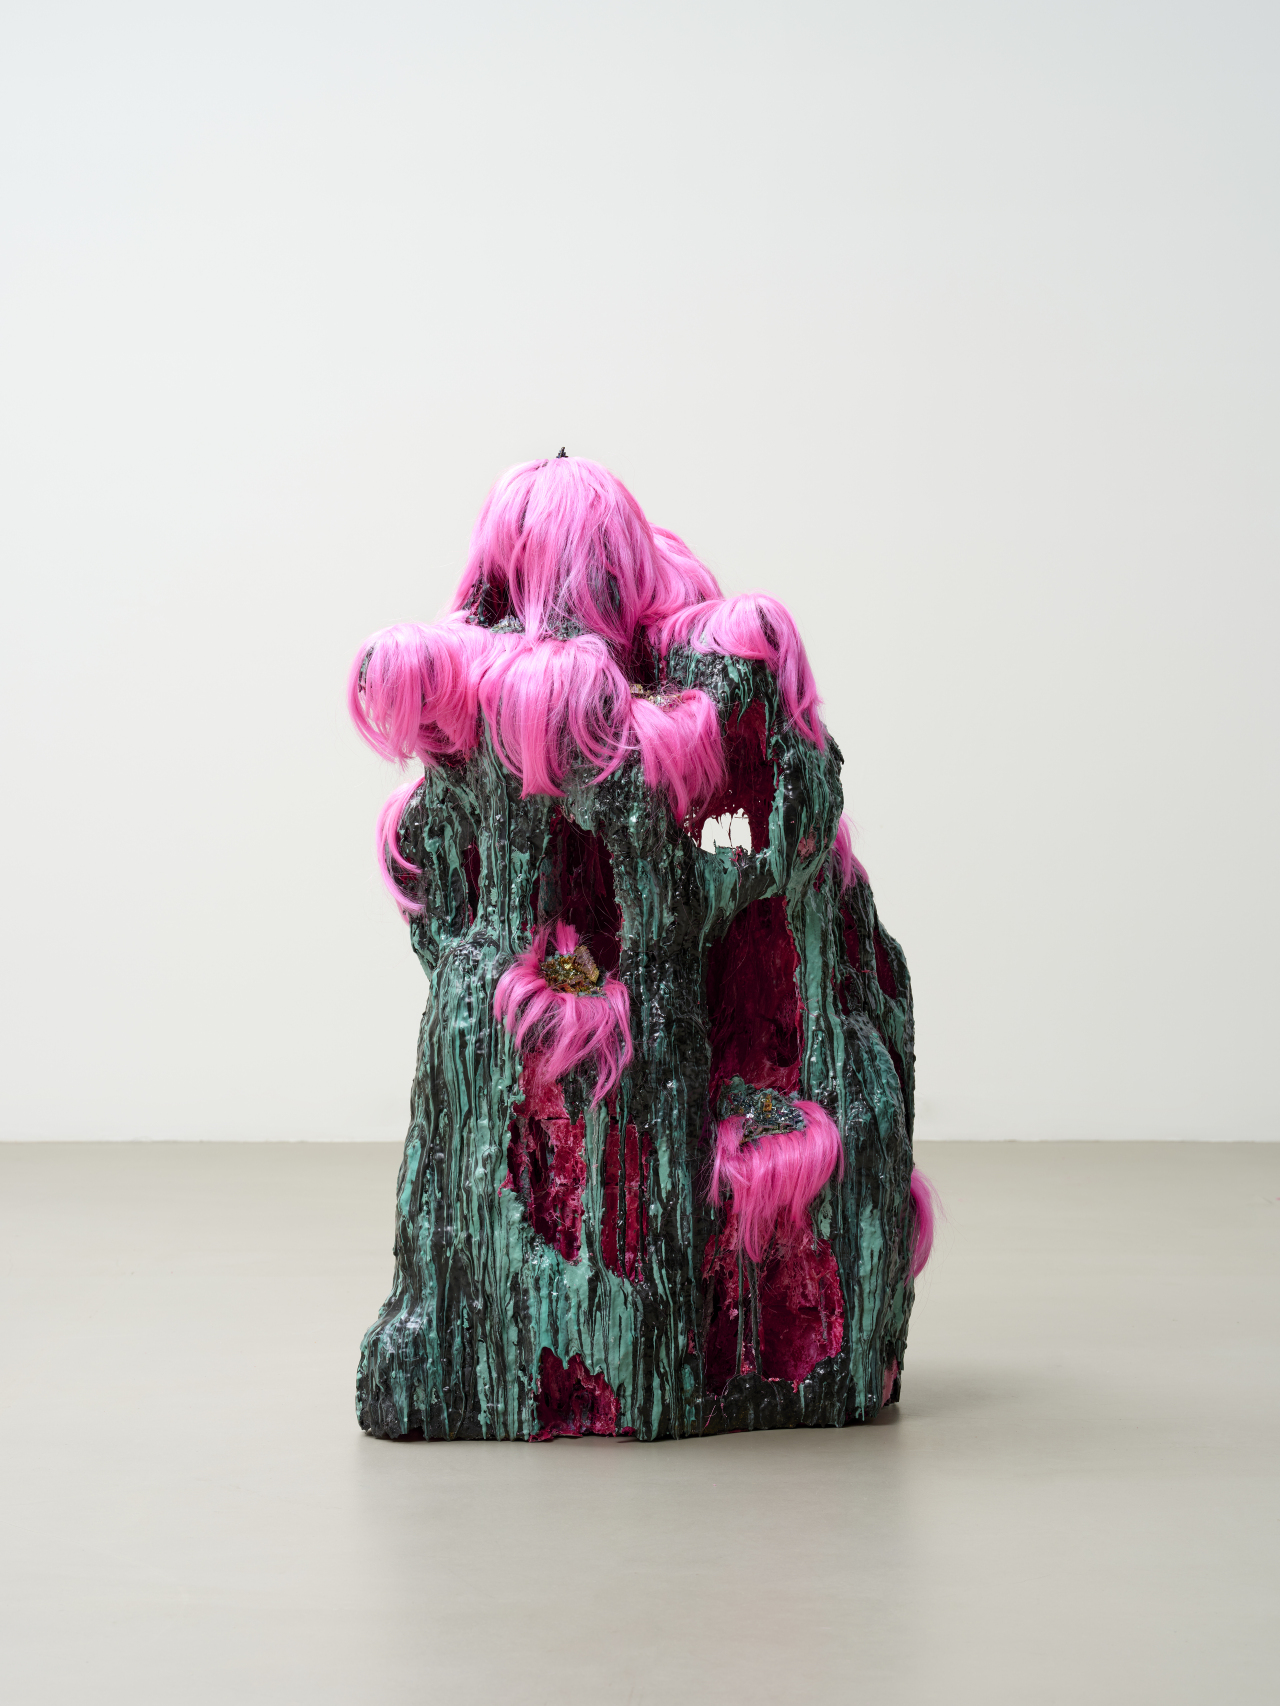 “Ghillie Suit with Zero Survival Rate” by Hyun Nahm (Atelier Hermes)